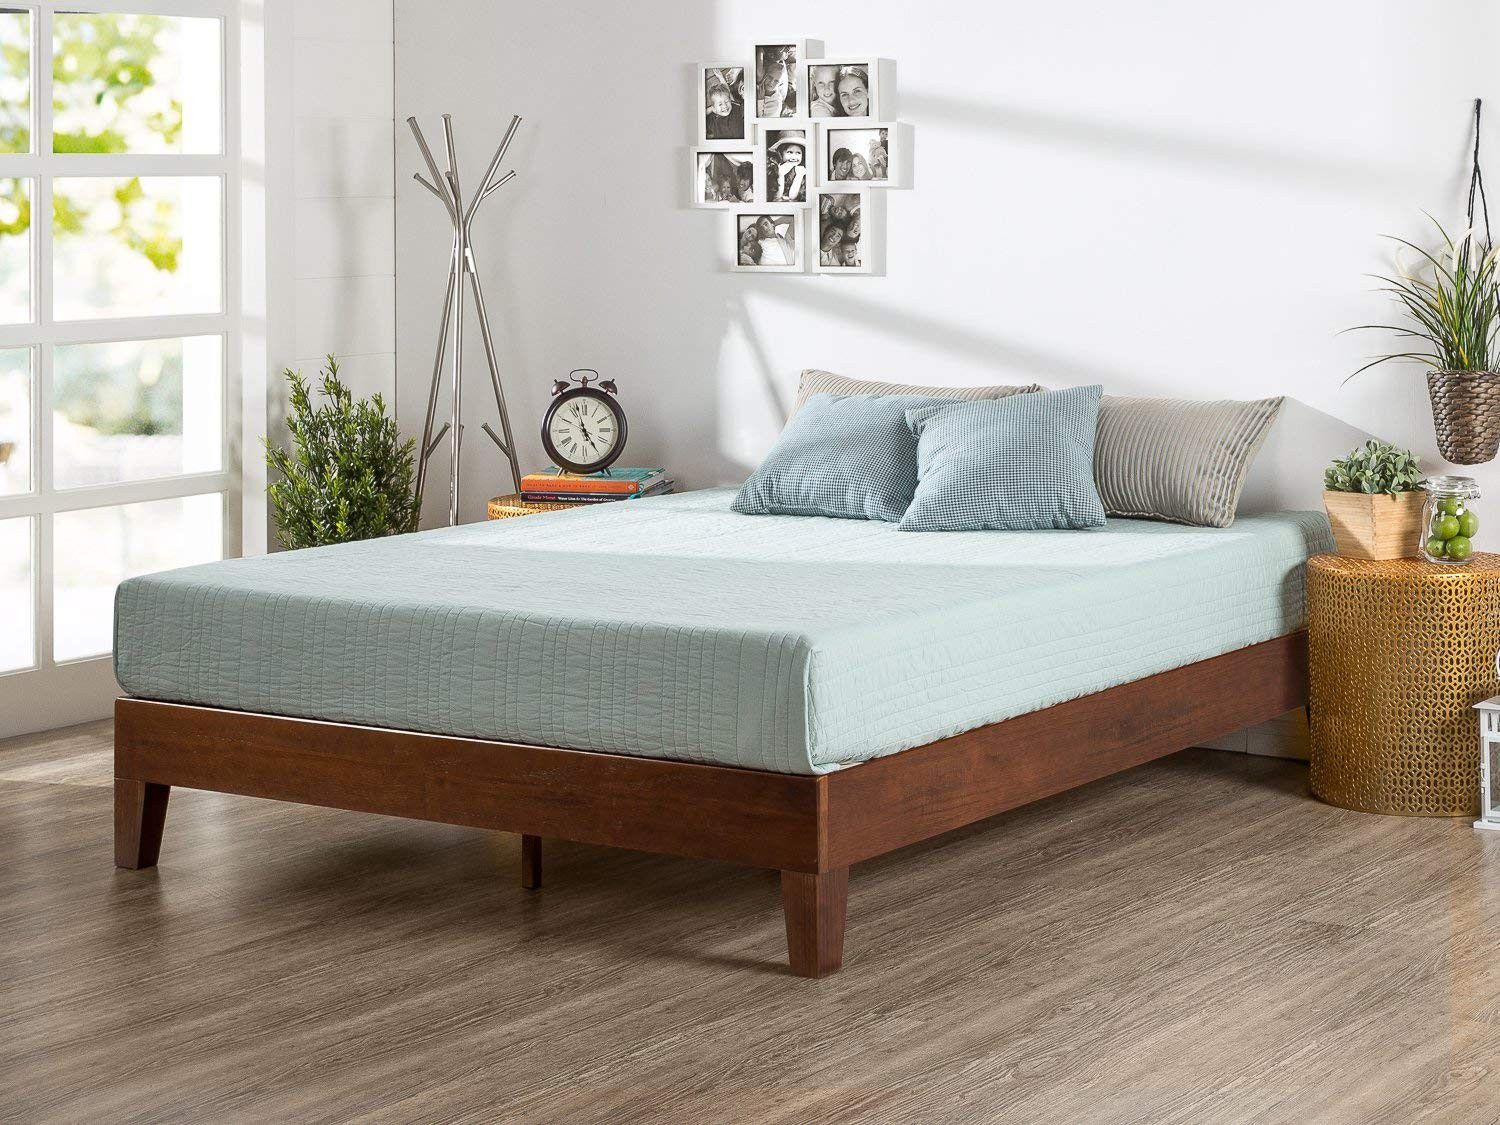 NEW KING size Wood platform bed frame, Antique Espresso Finish $100 Or with 10" Mattress king size $300